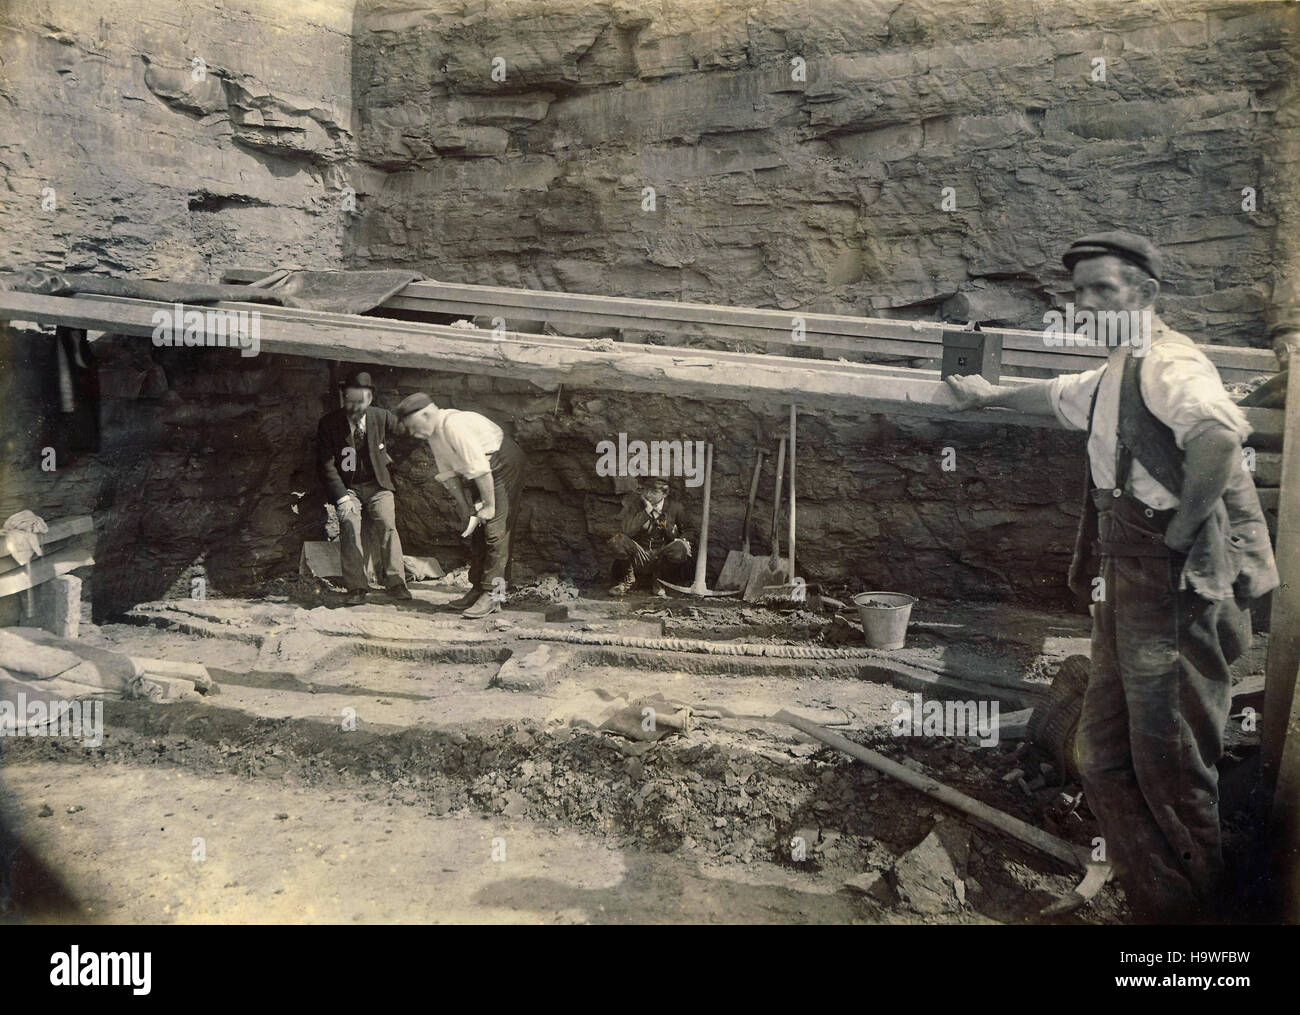 Historic archive image of fossil hunters / archaeologists digging up the fossilised remains of an ichthyosaur at Stockton Lime Works in Warwickshire 1898. Stock Photo